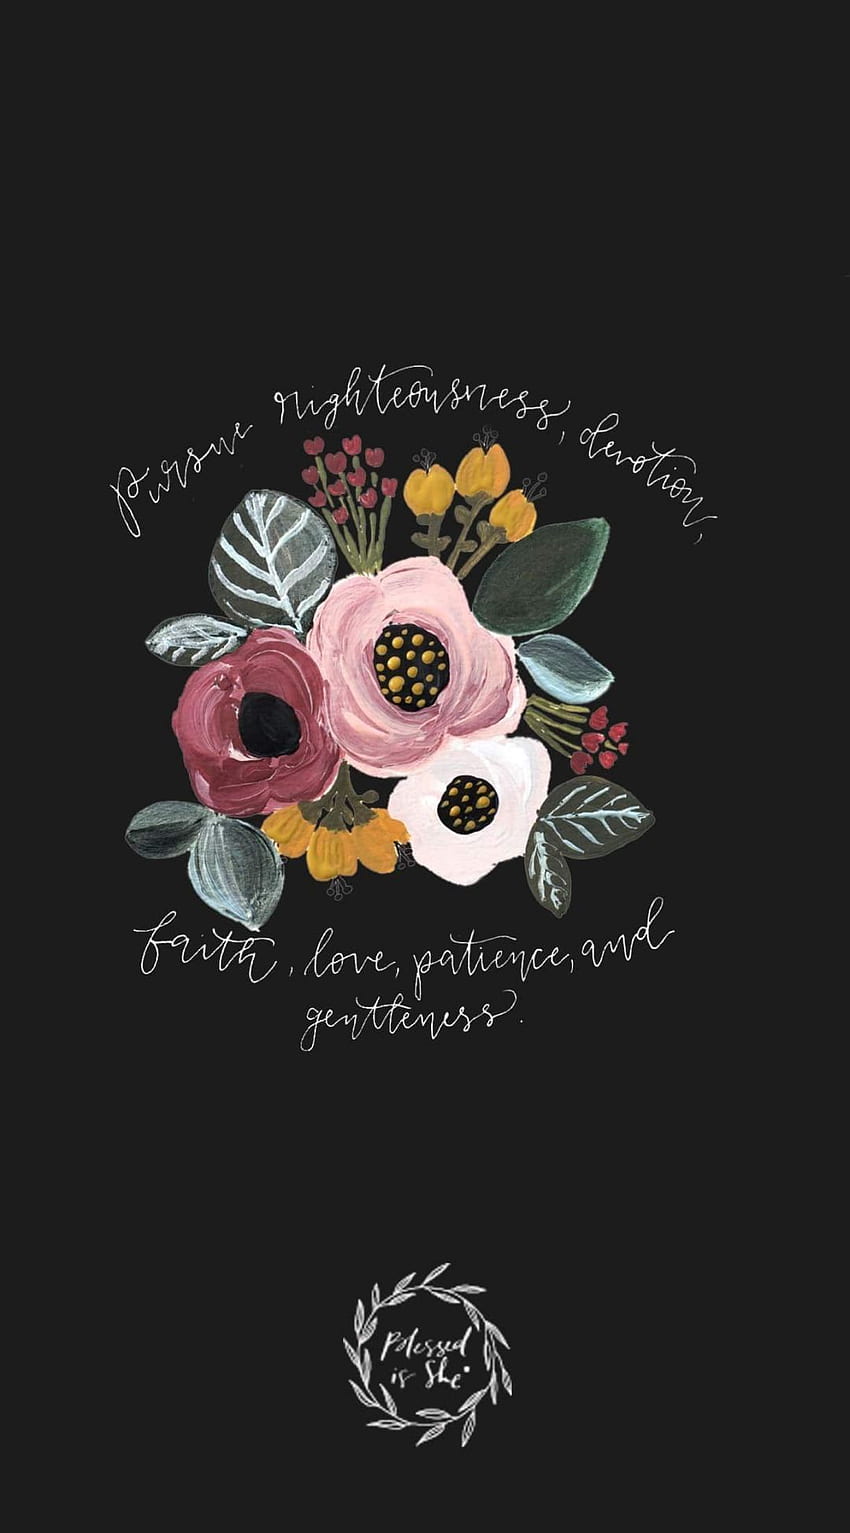 IPhone wallpaper with a floral design and a Bible verse from Ephesians 6:9 - Christian iPhone